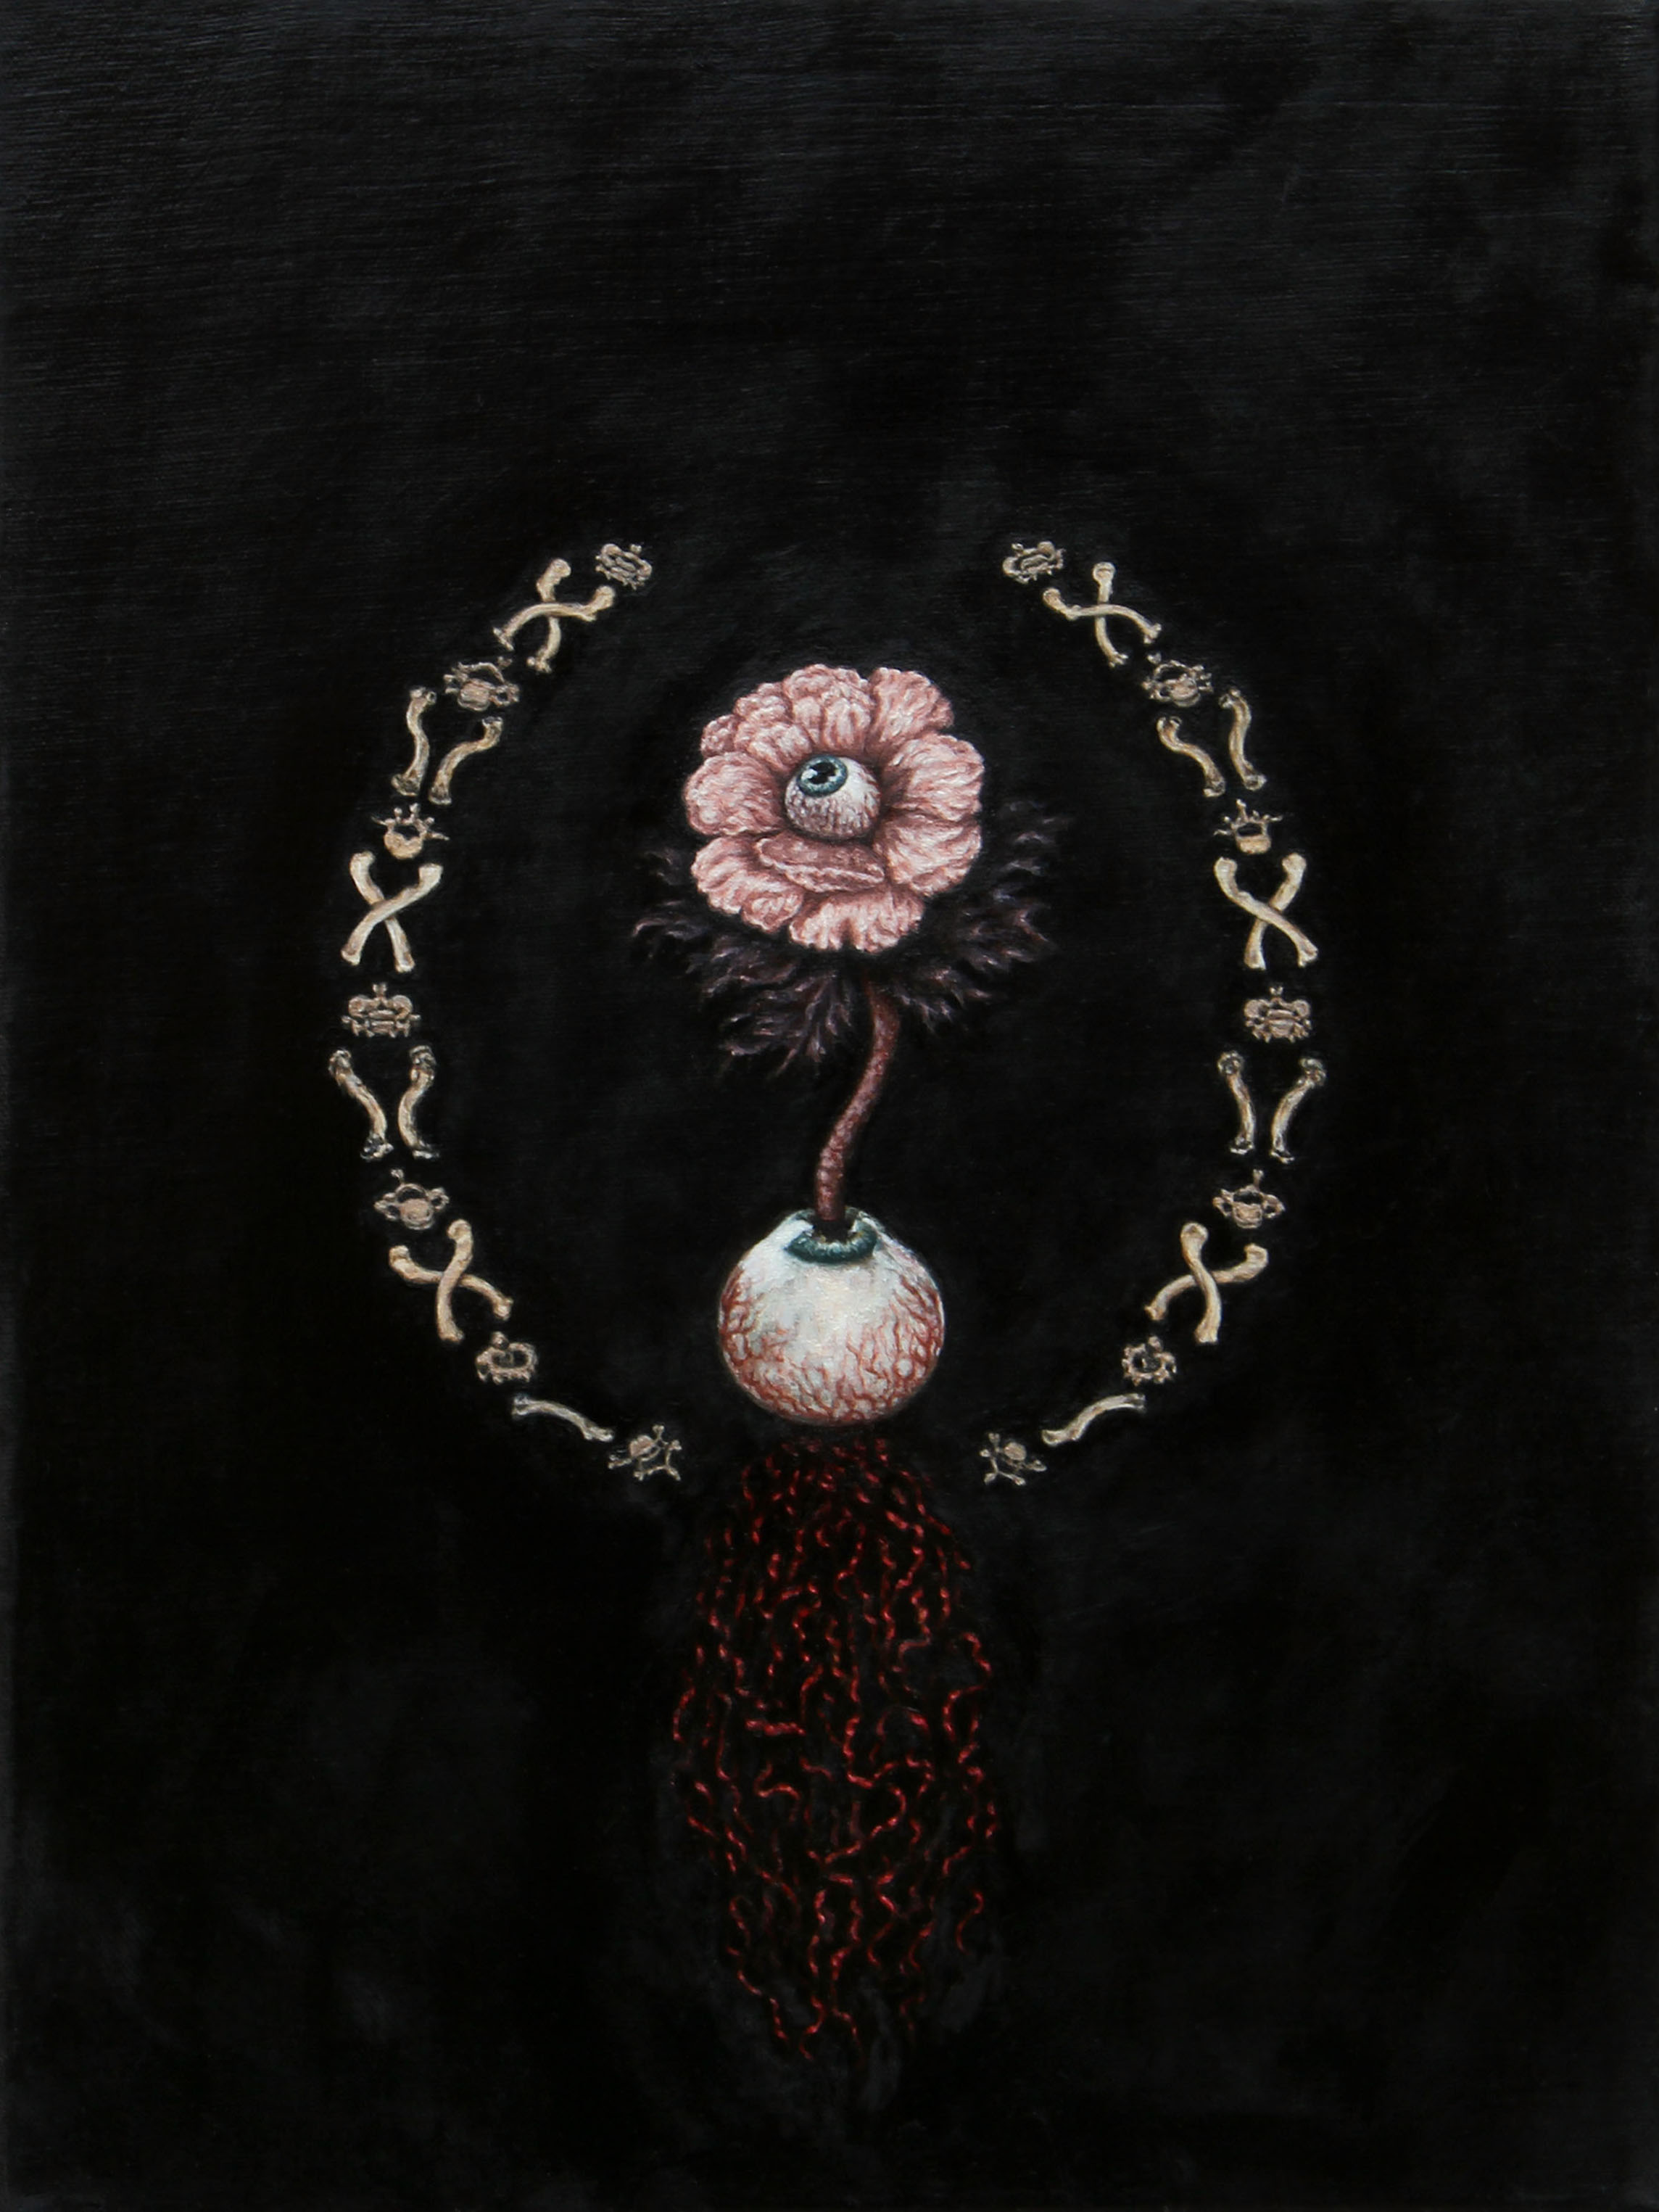 Painting in a dark-surrealistic style with a human eyeball at the centre, a flower grows out of this with flesh coloured petals and the flower has a smaller eyeball at it's centre. This is surrounded by a wreath of small human bones, the background is black.